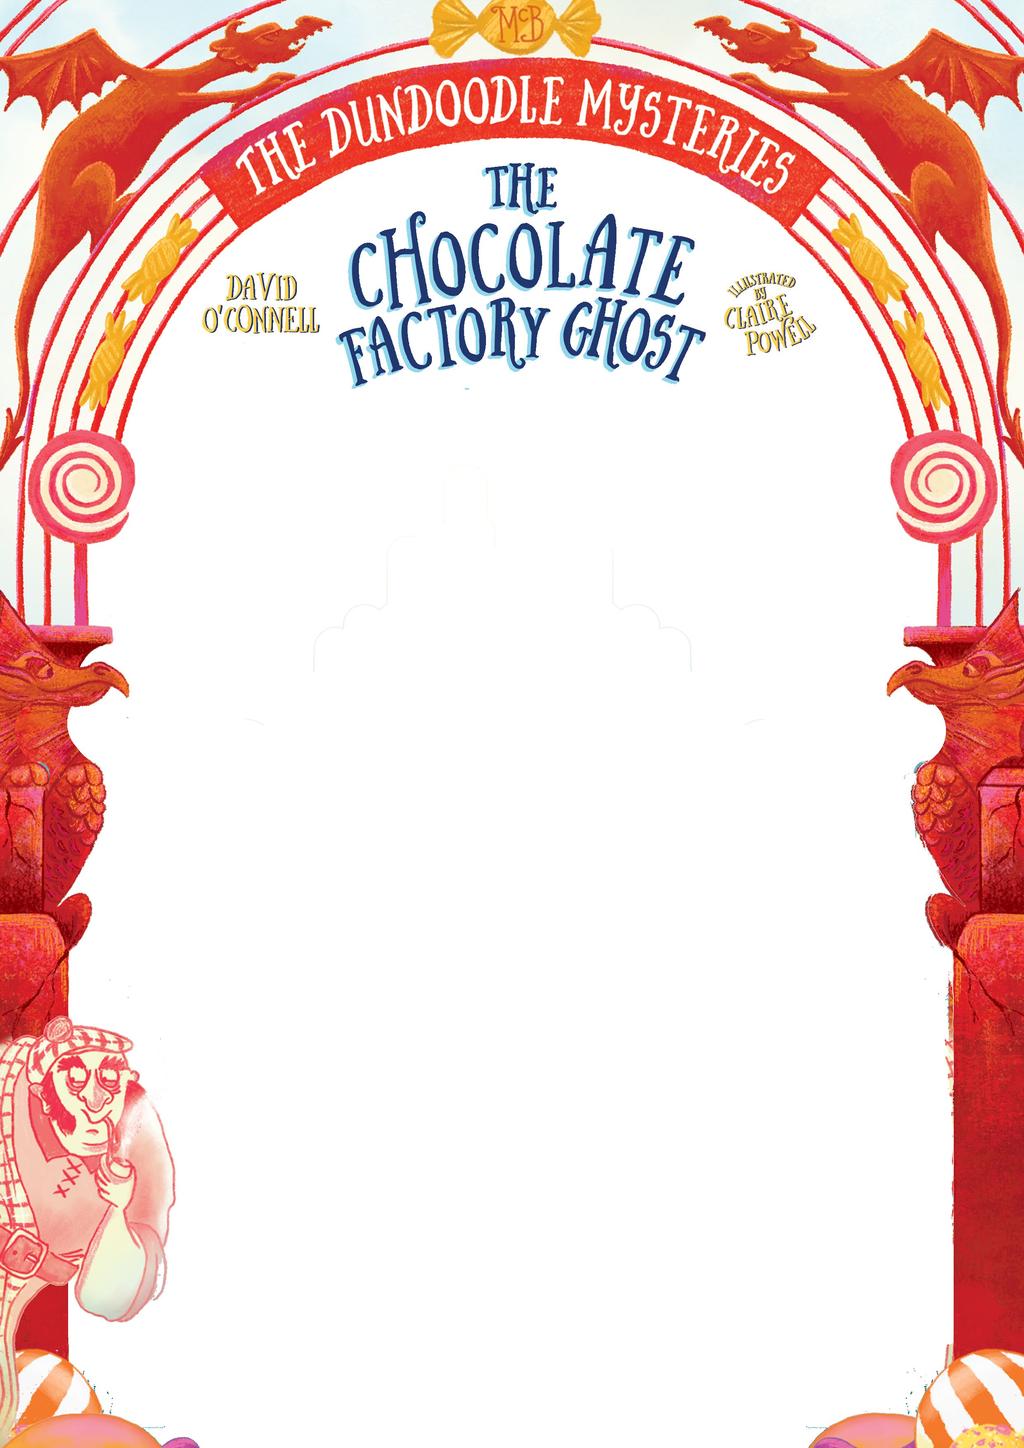 The Chocolate Factory Ghost by David O Connell and illustrated by Claire Powell is the perfect KS2 class reader for comedic adventure writing, magic and fantasy, aimed at children aged 7 9.